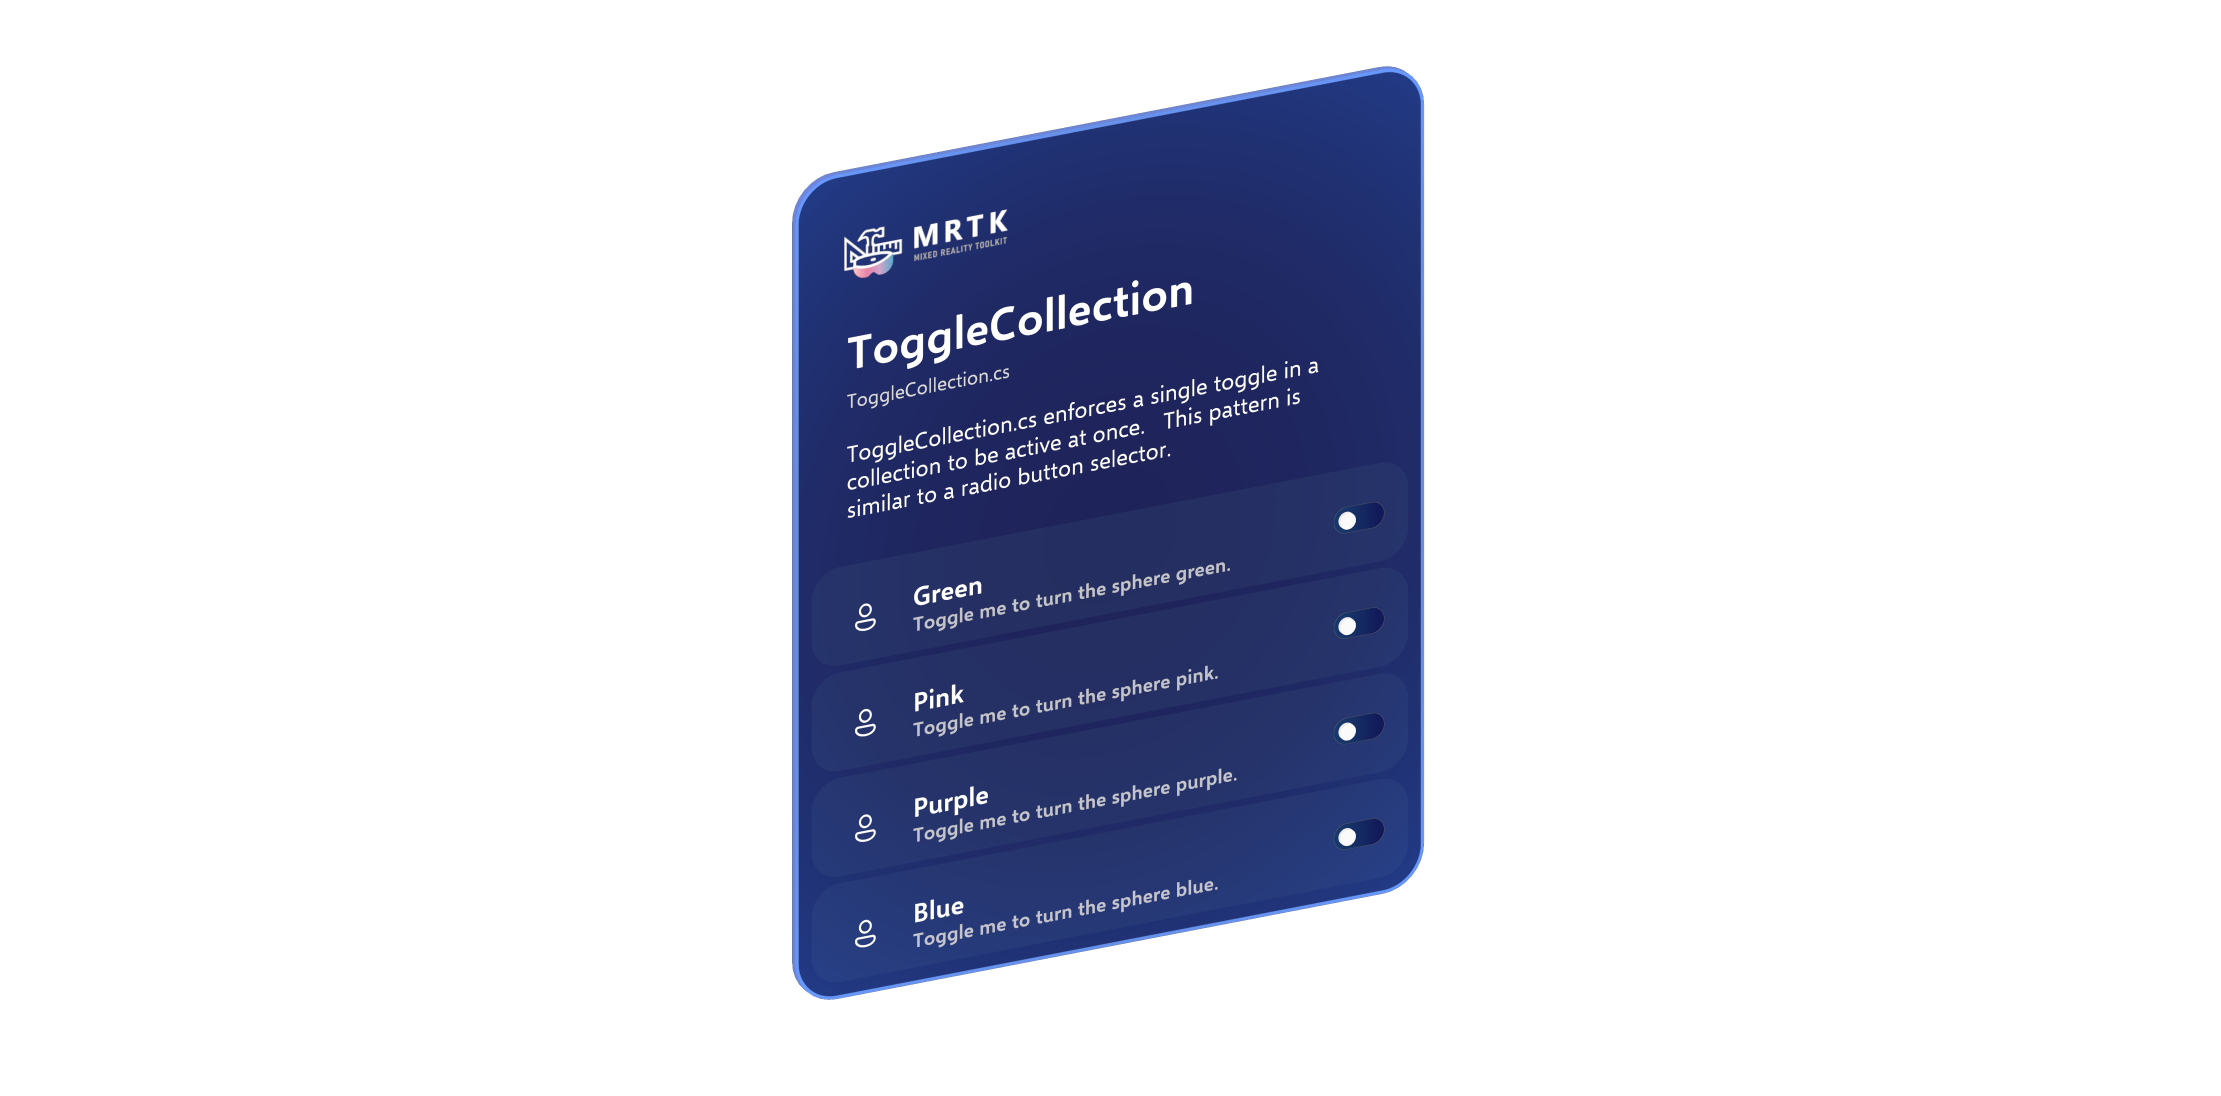 Image of an example ToggleCollection